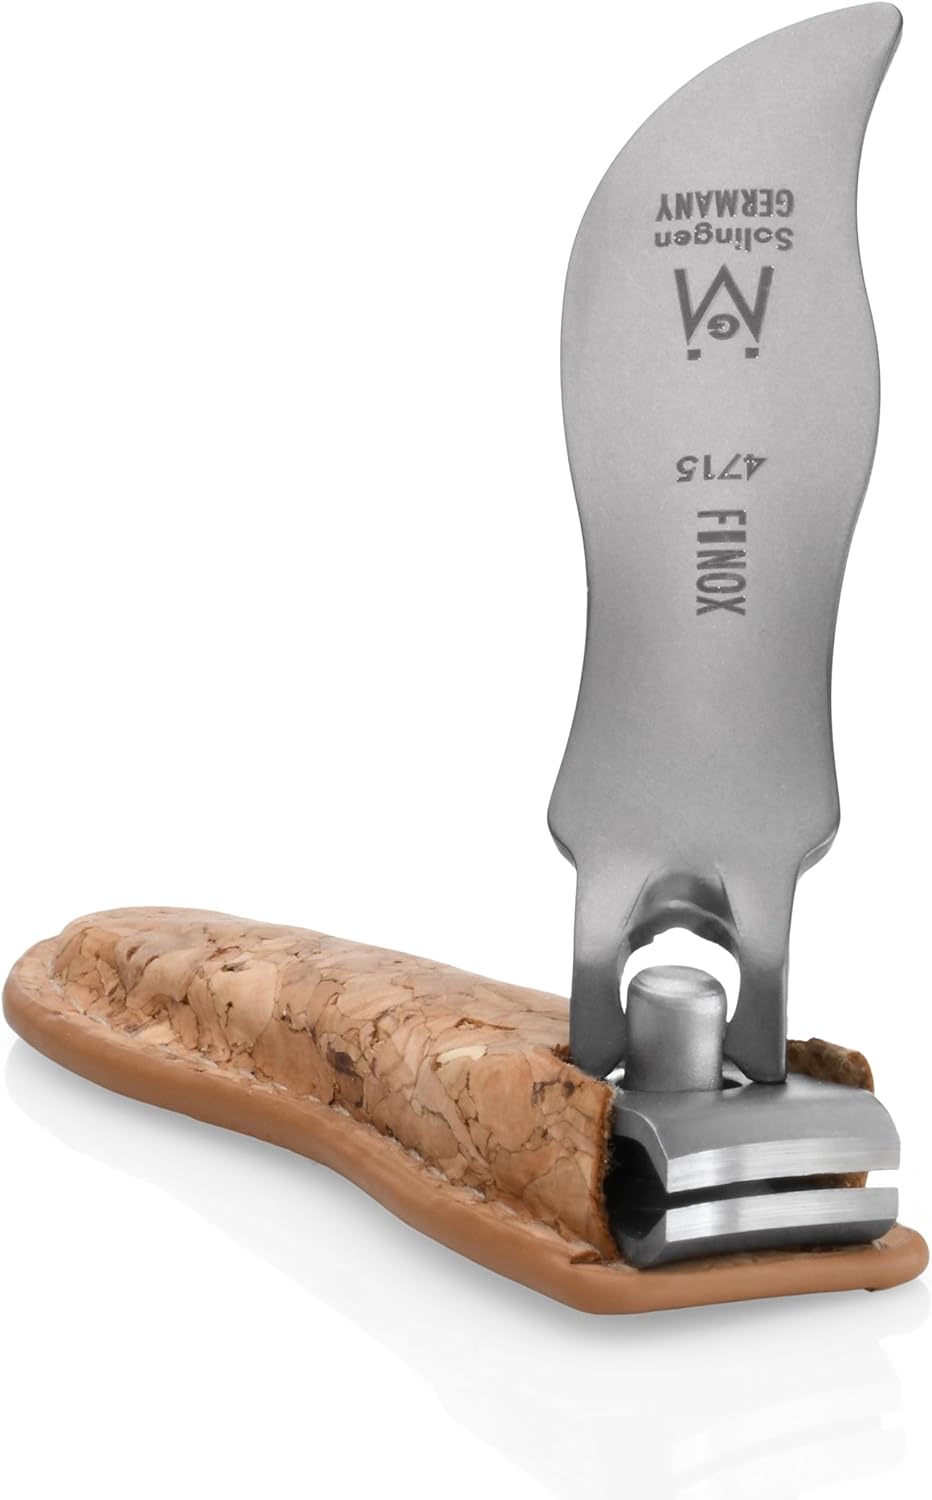 GERMANIKURE Small nail clipper with cork case